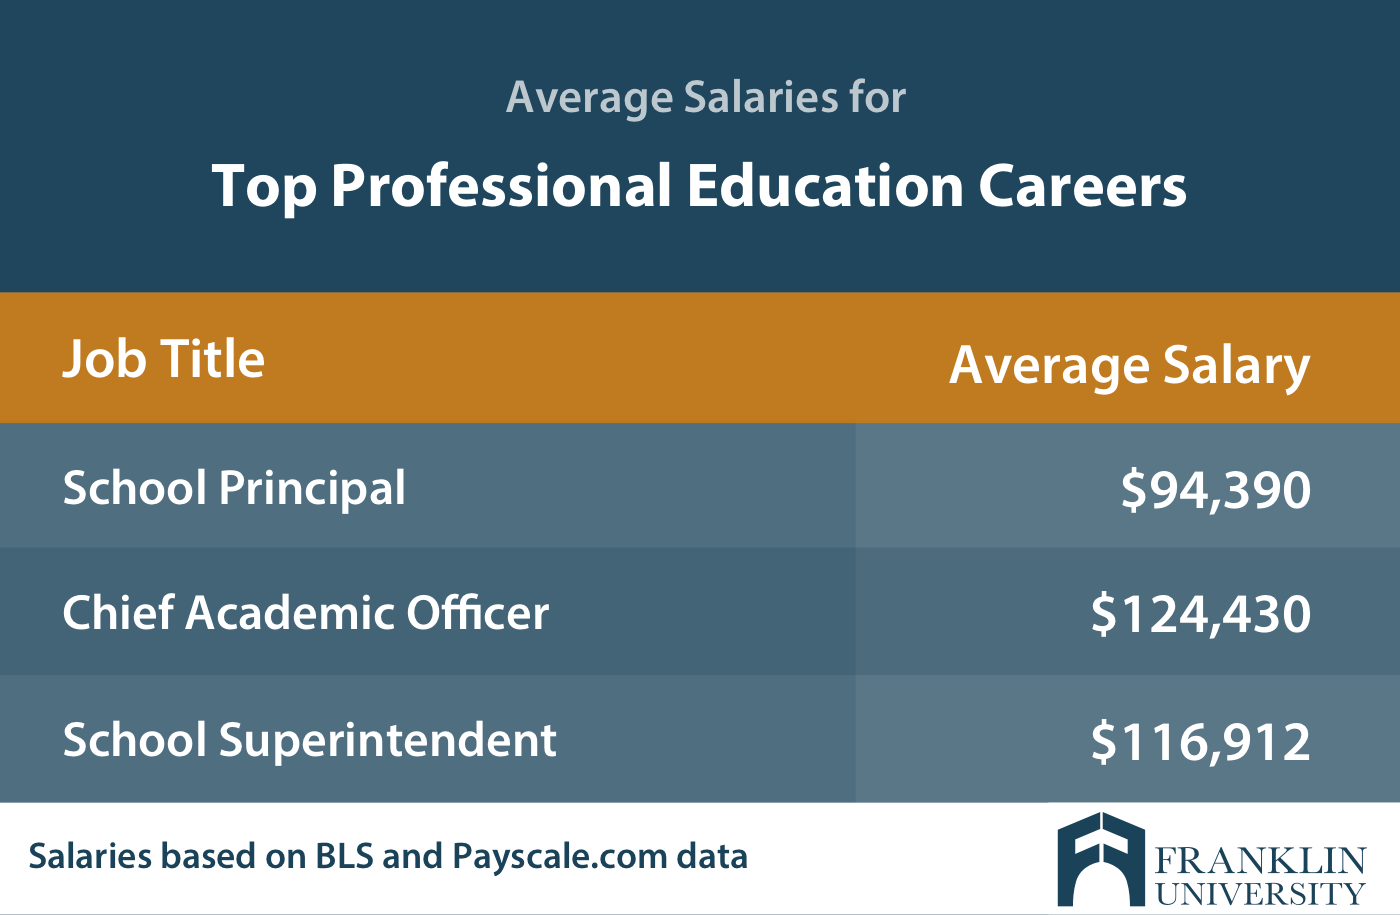 graphic describing the average salaries for top professional education careers